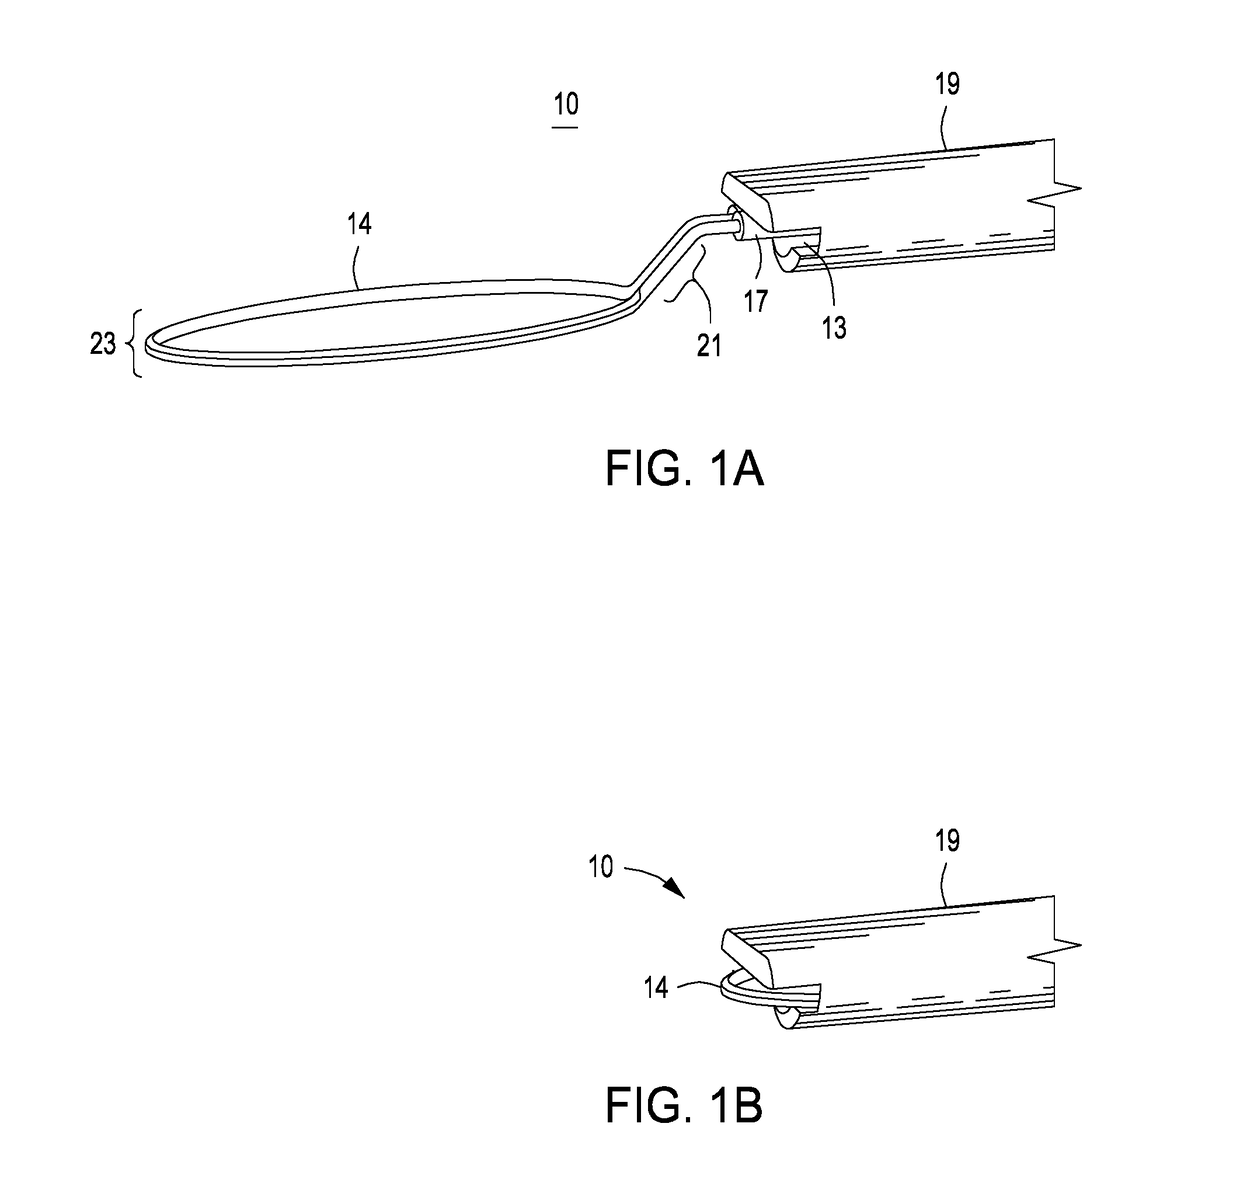 Enhancing performance of a capsulotomy device